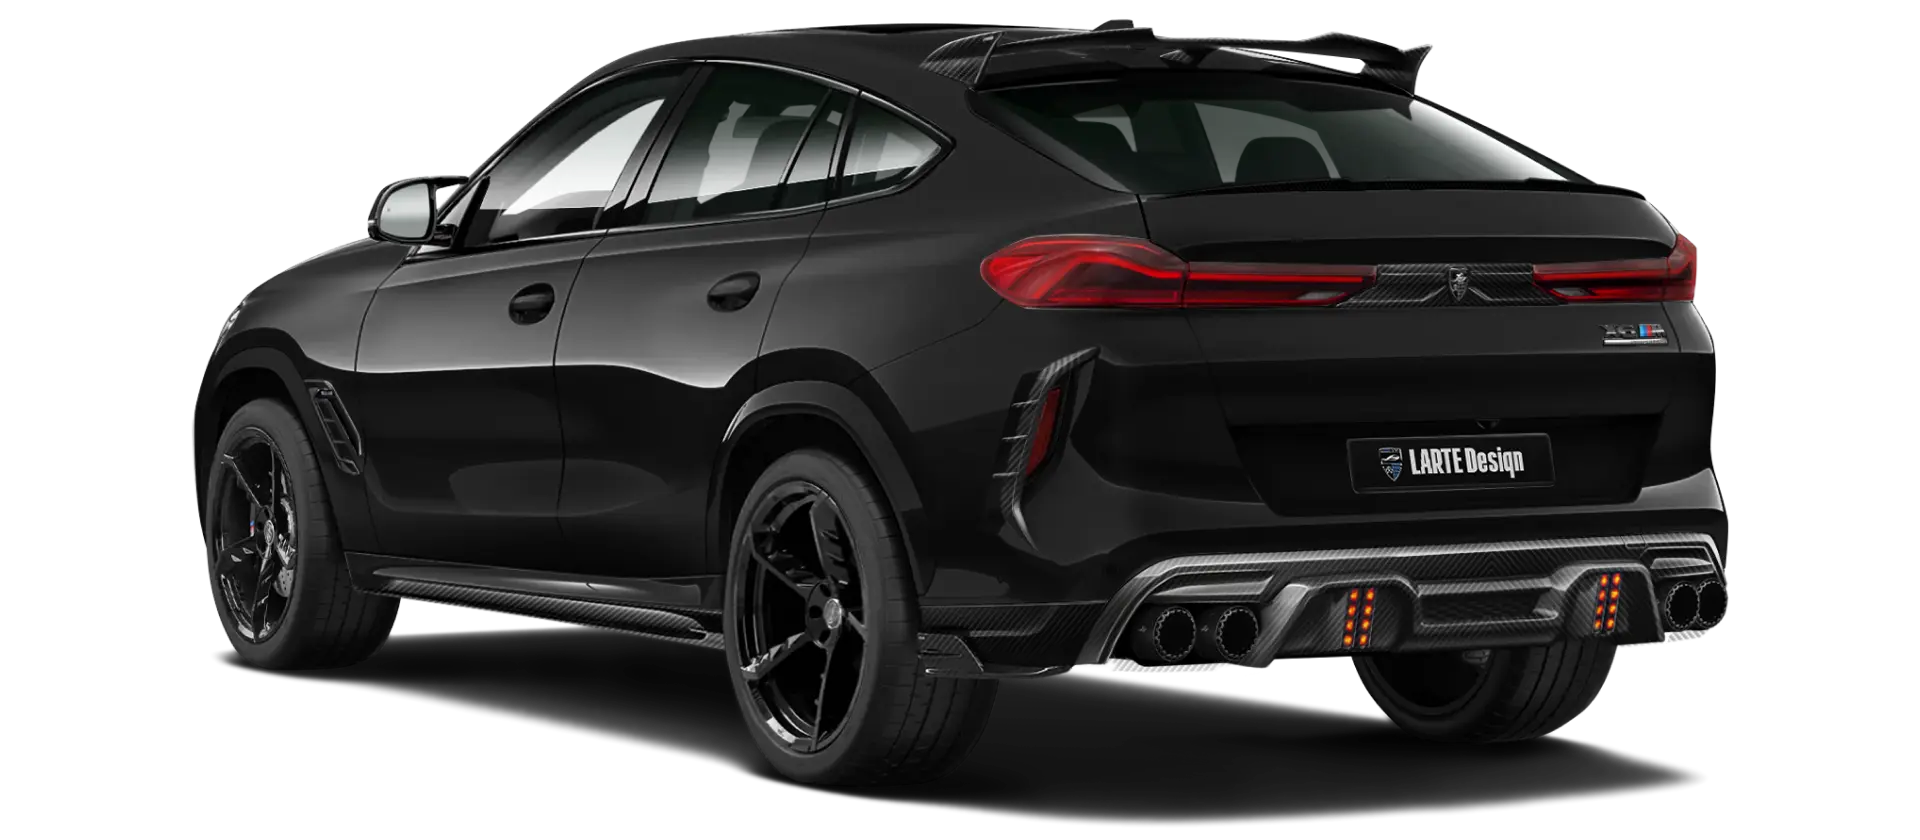 BMW X6M F96 LCI 2023 with carbon body kit: back view shown in Black sapphire